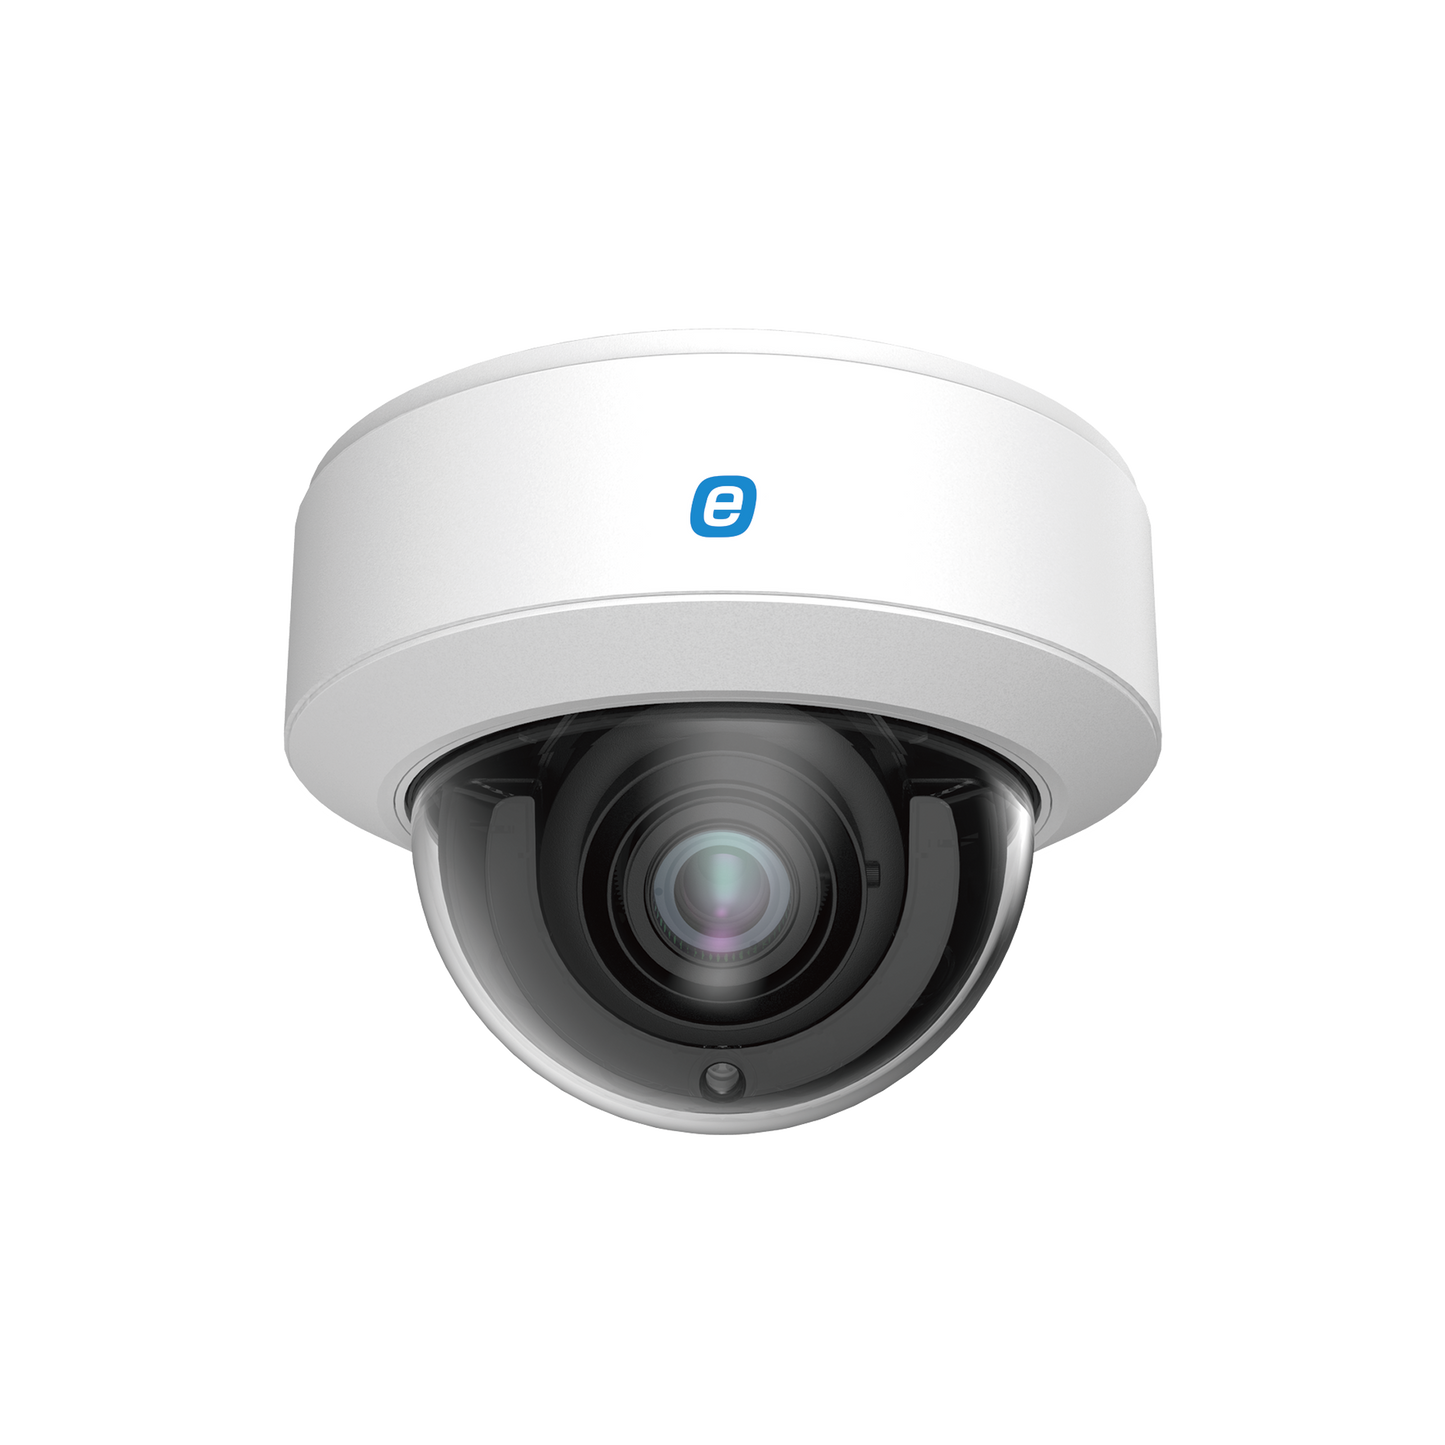 IP Dome 4 MP / POE / 164ft (50m) IR / WDR (120dB) / Micro SD / IP67 / 2.8 mm - 12 mm Motorized Lens / Integrated Microphone / Cloud Video Recording / Metal